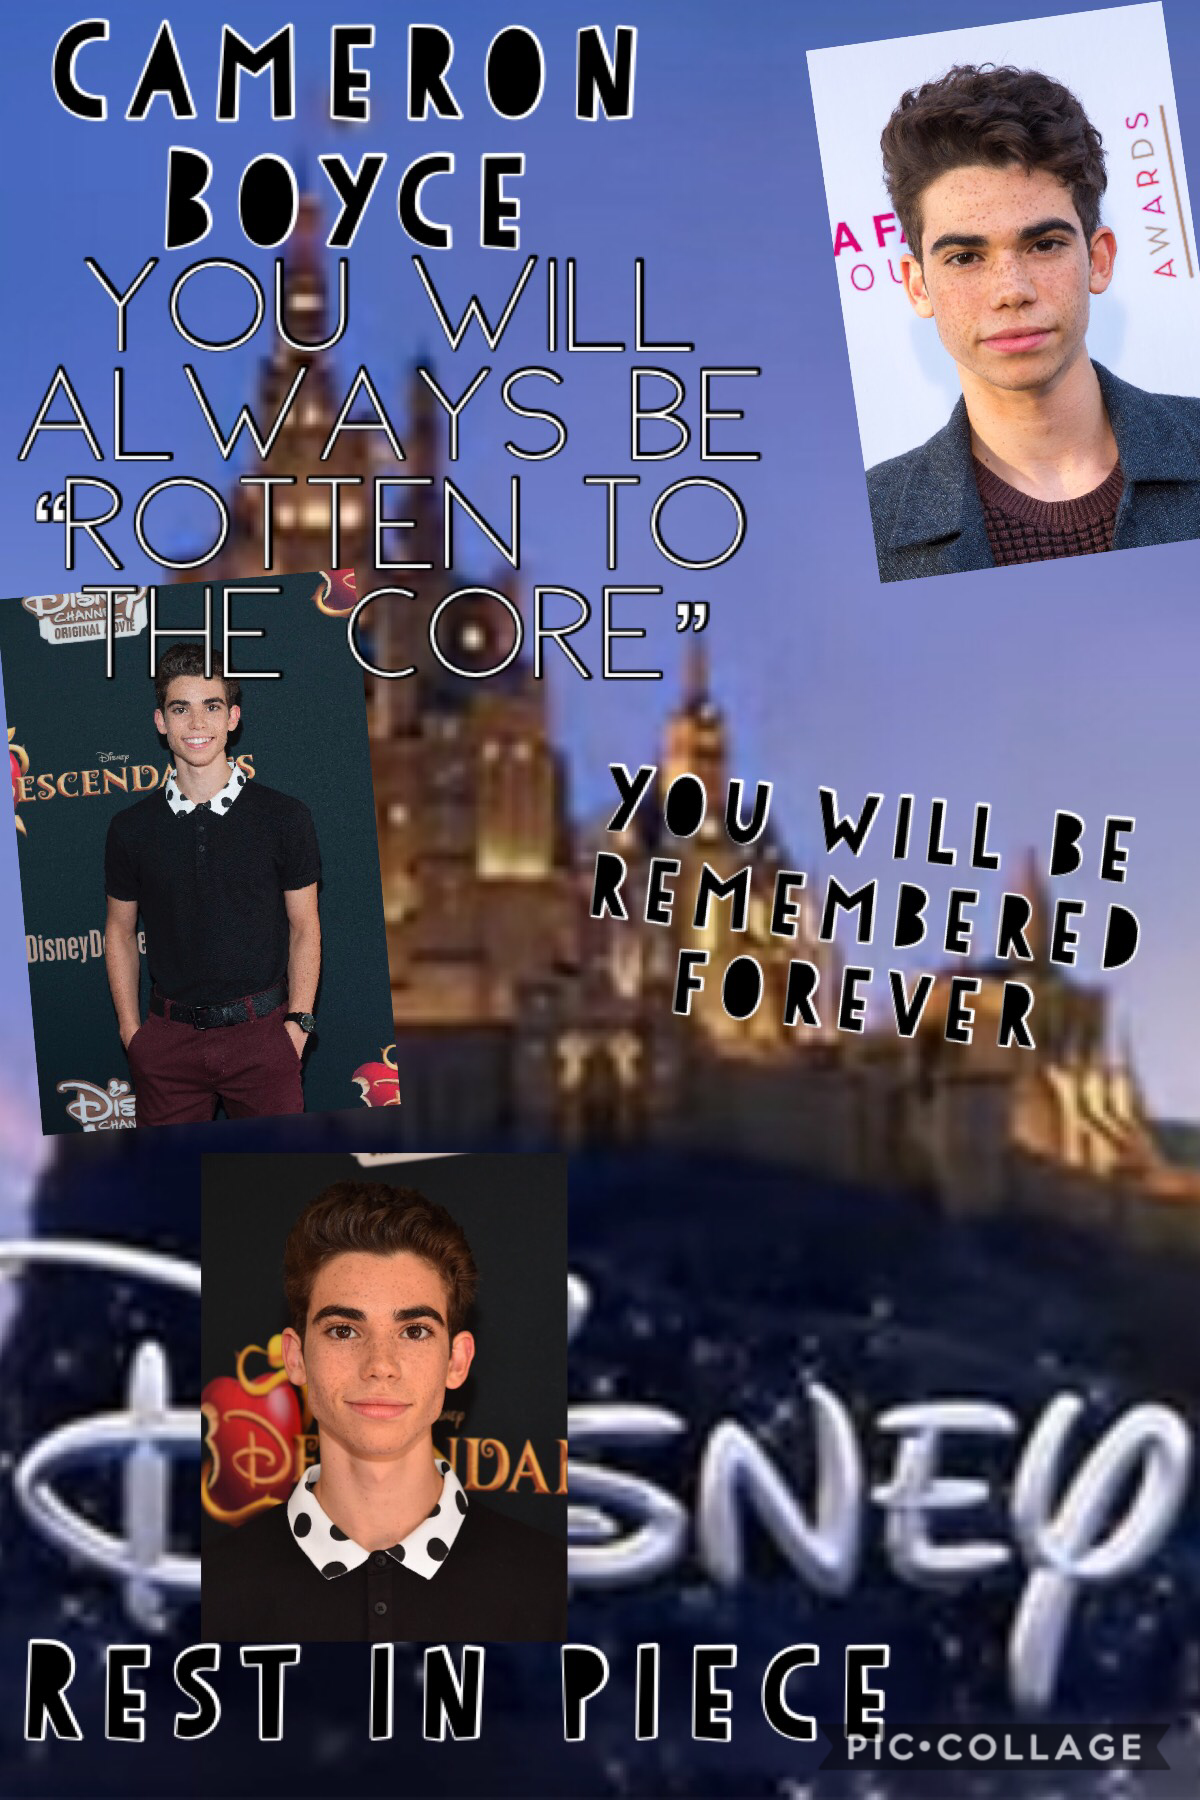 Rest In Piece Cameron Boyce

You will always be in our hearts and for those who understand Descendants you will always be “Rotten to the core!” 

Cameron played Carlos in Disney’s  Descendants.